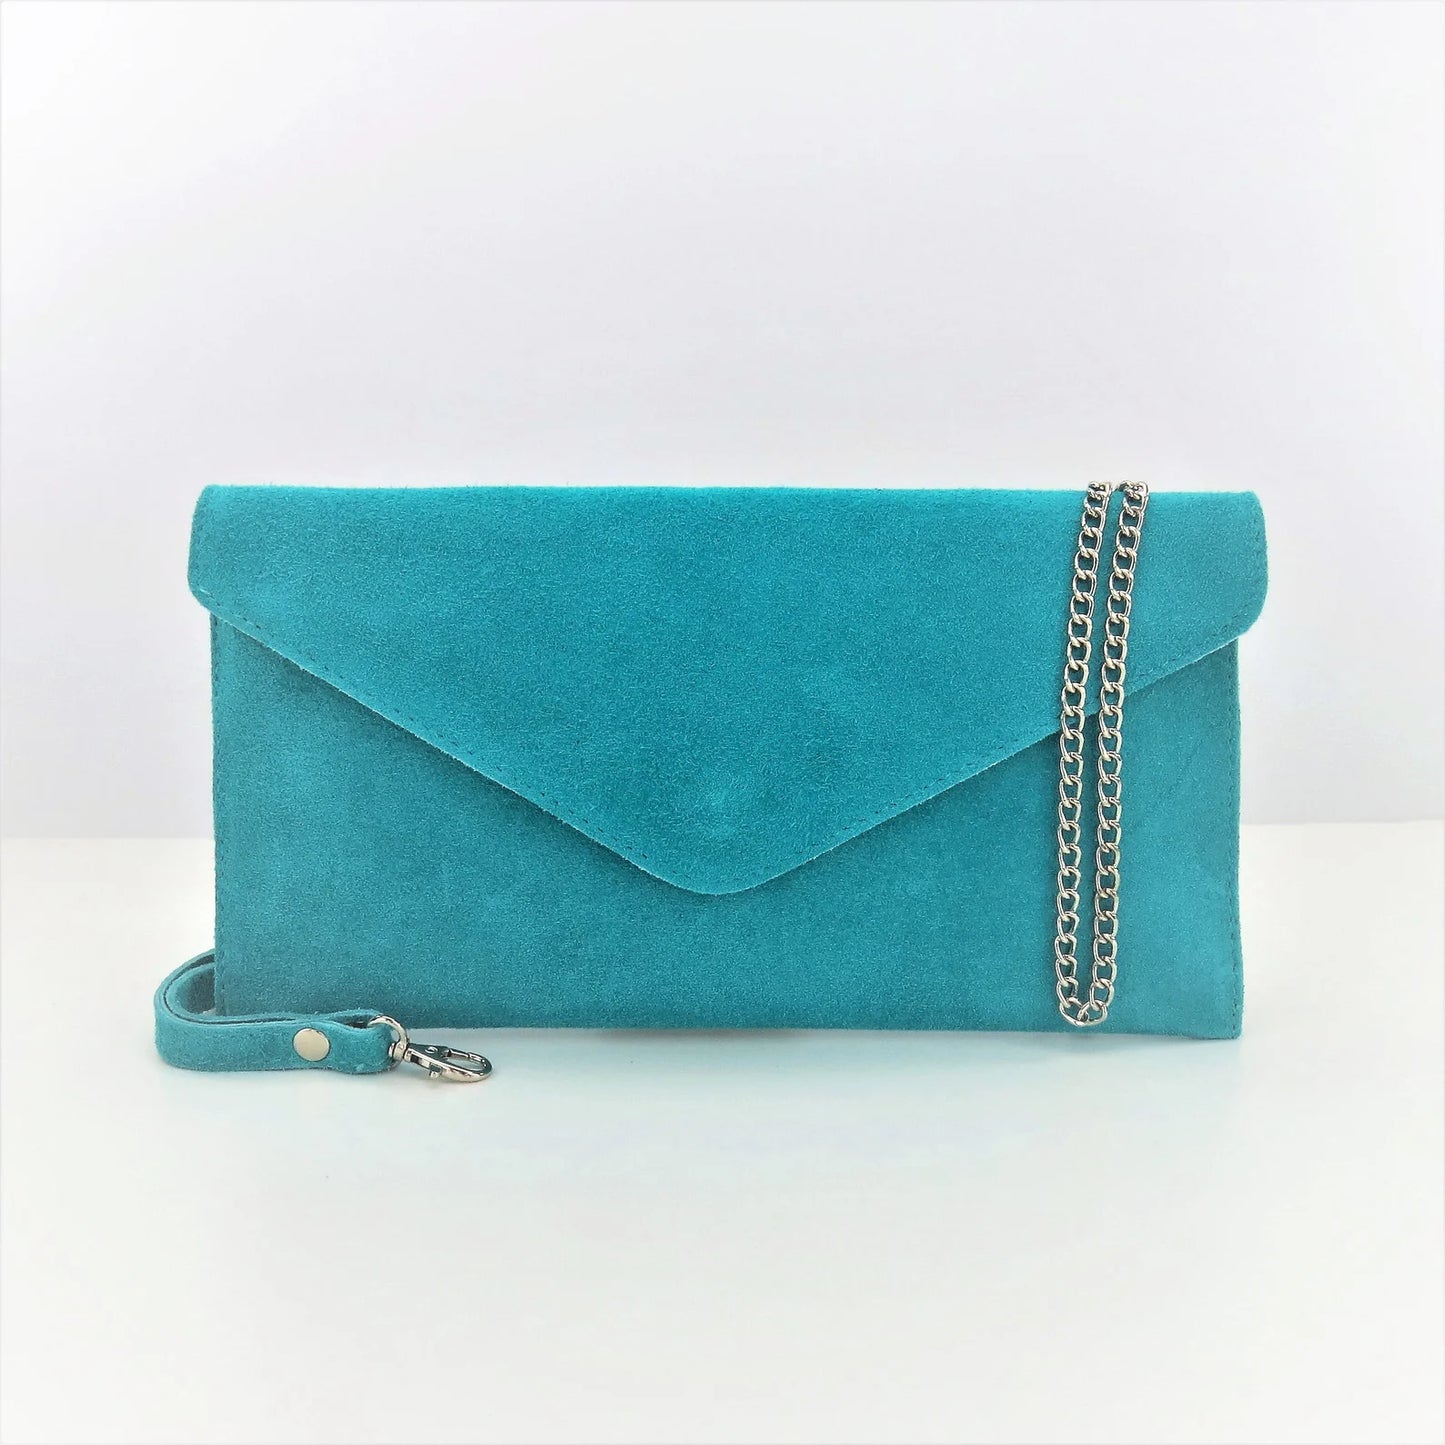 Turquoise Envelope Clutch Bag ith chain strap